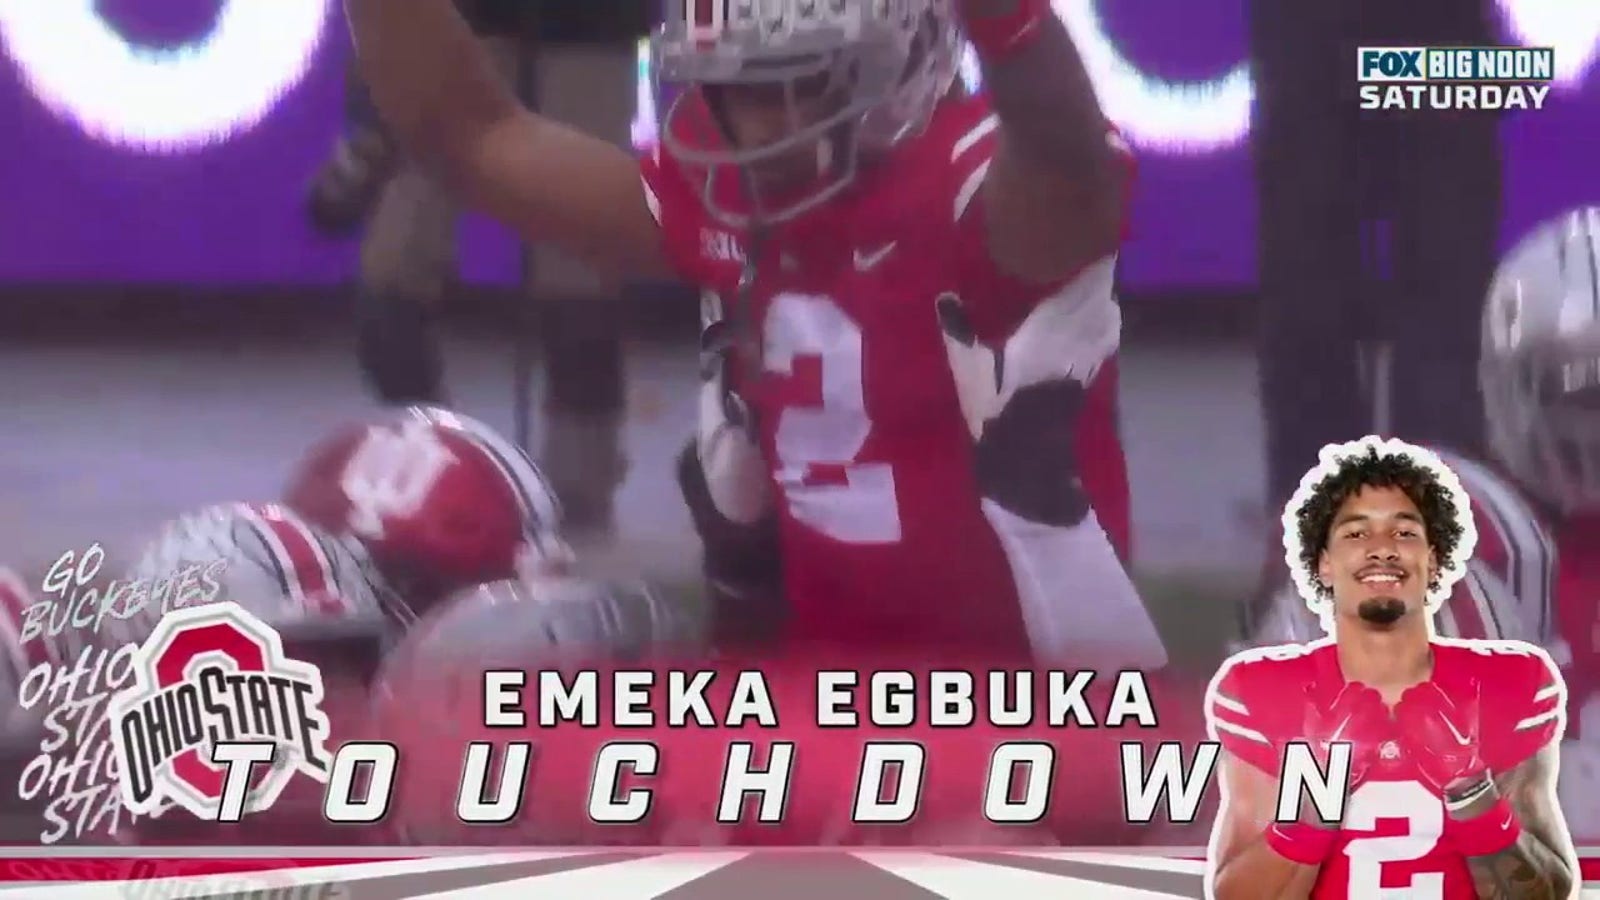 CJ Stroud passed to Emeka Egbuka for a six-yard touchdown to give Indiana a 7-0 lead